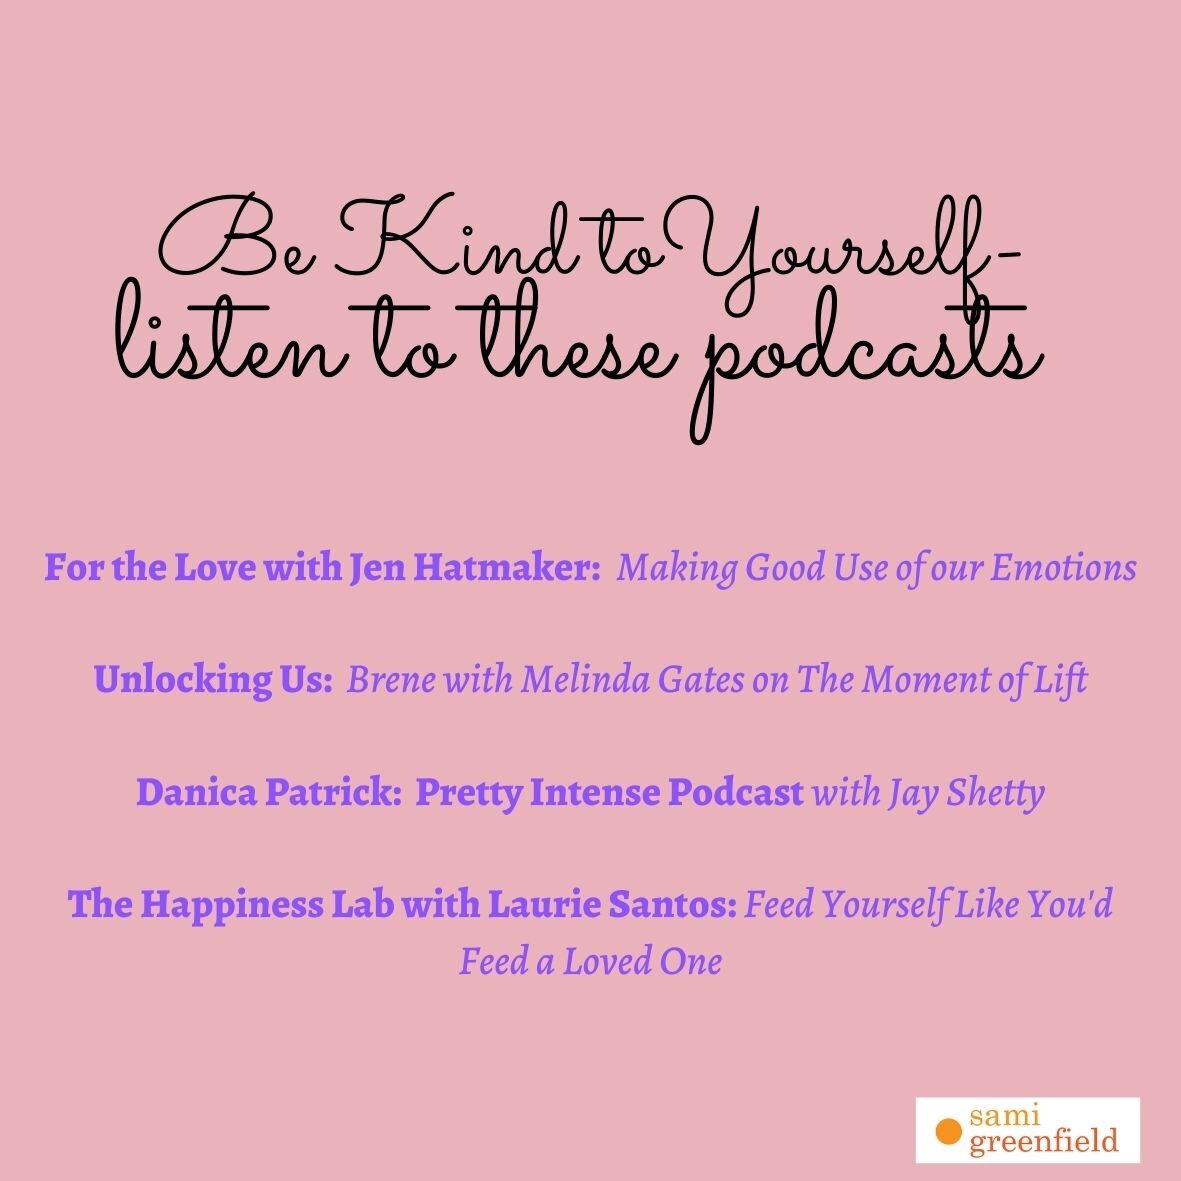 Be kind to yourself podcasts copy.jpg